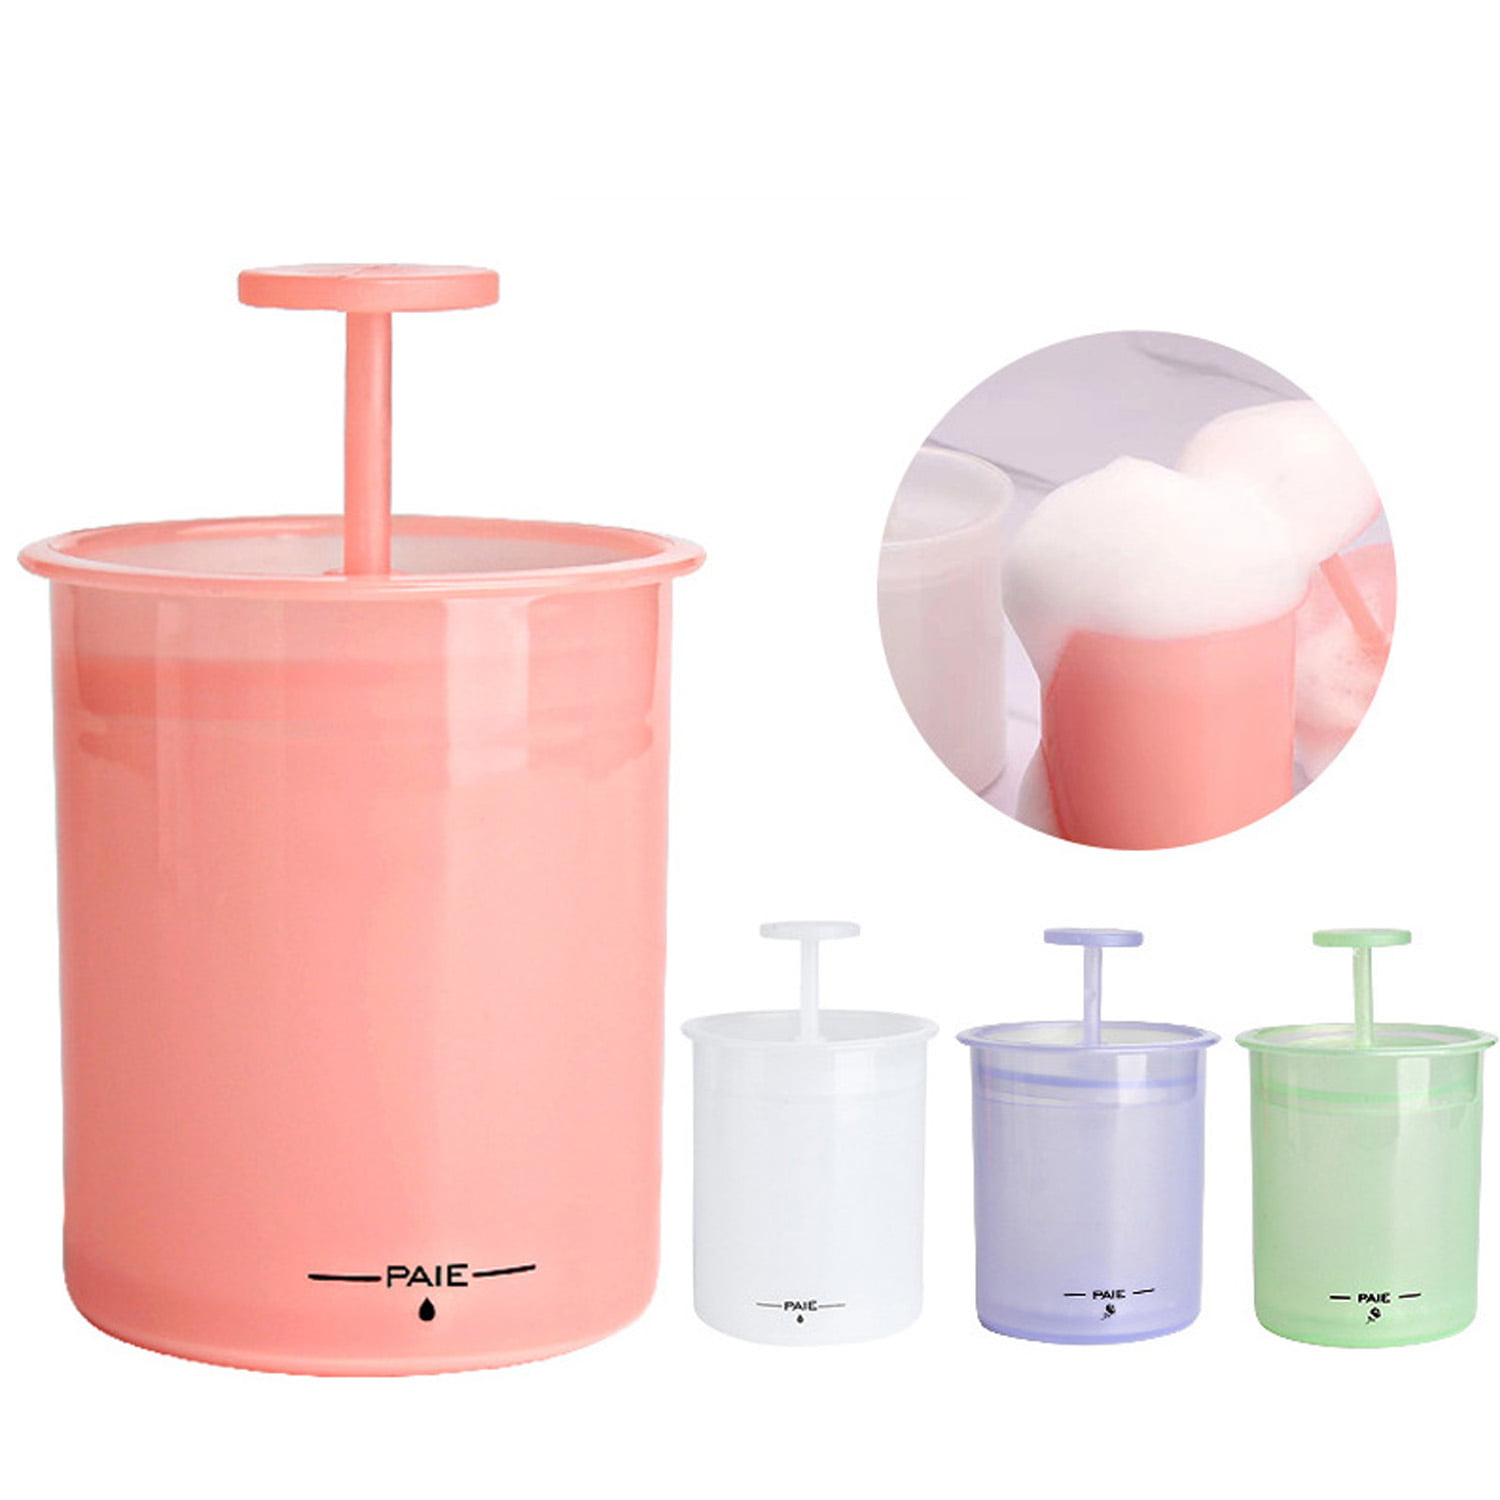 DOITOOL Face Wash Foam Maker Facial Cleanser Foam Cup Whip Bubble Maker  Foam Whip Maker Facial Skin Cleansing Care for Home Travel Pink